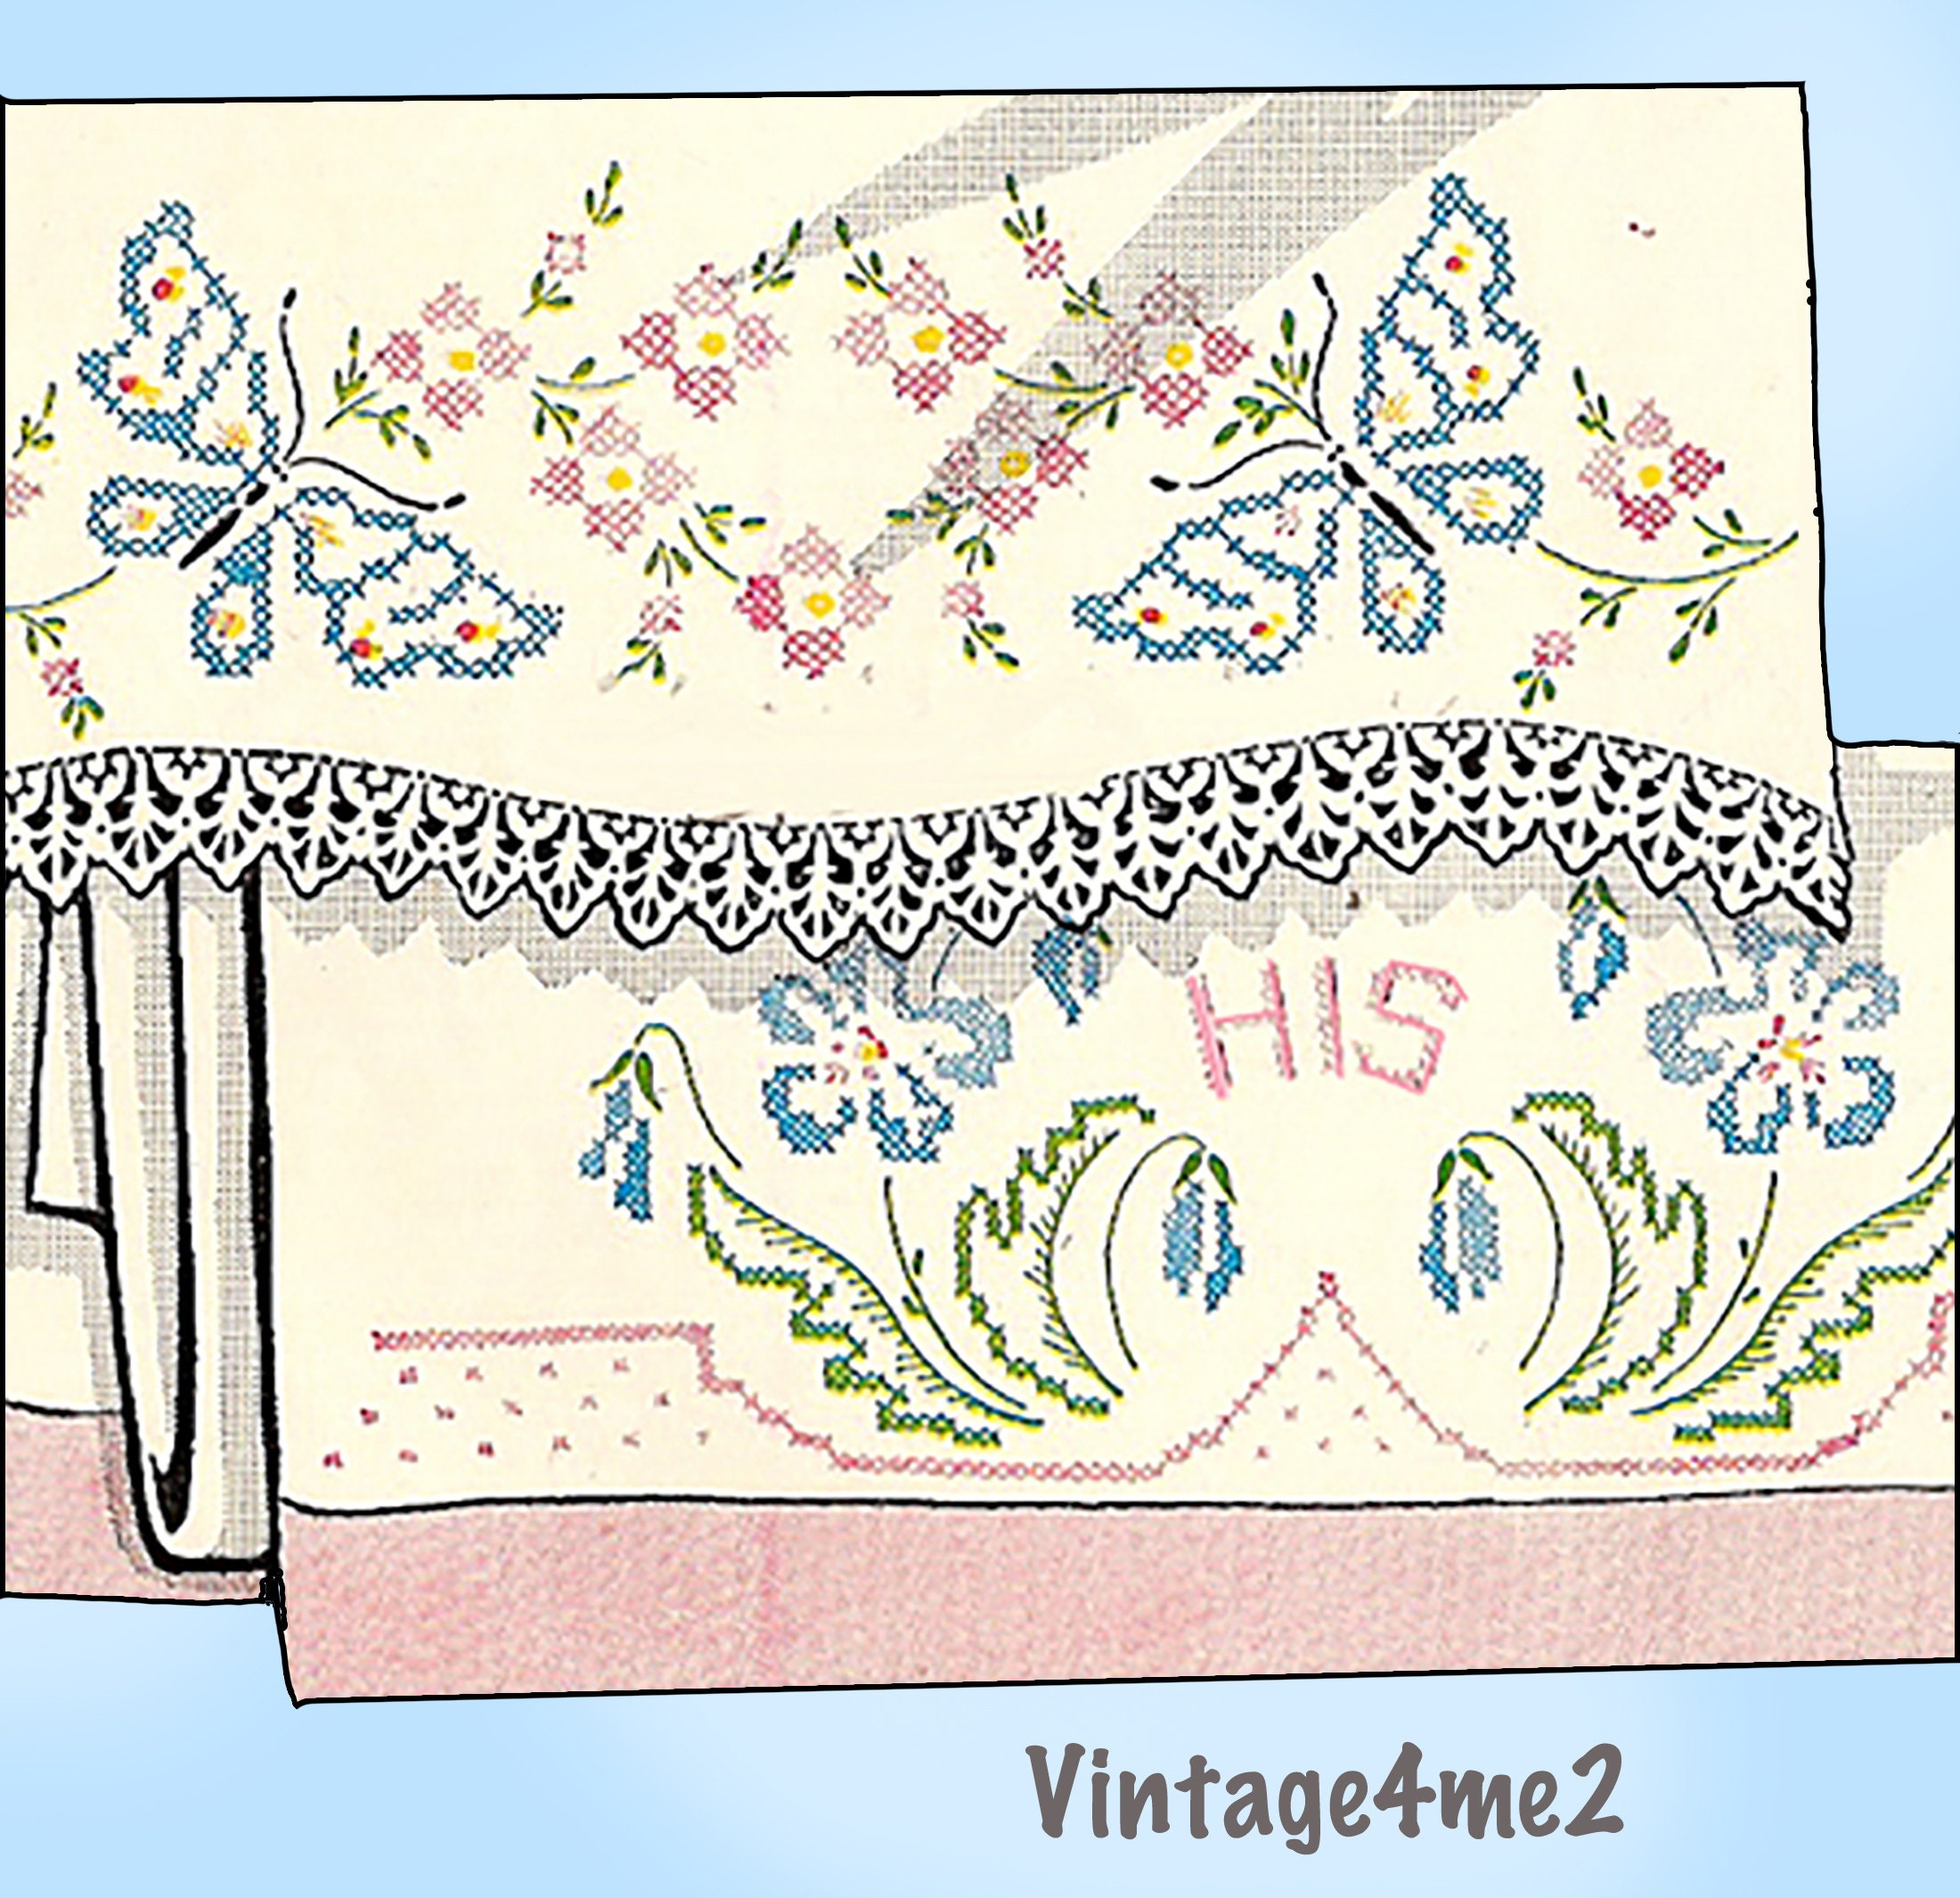 Vintage VOGART Embroidery Transfer Patterns for Charming Pillowcases Floral